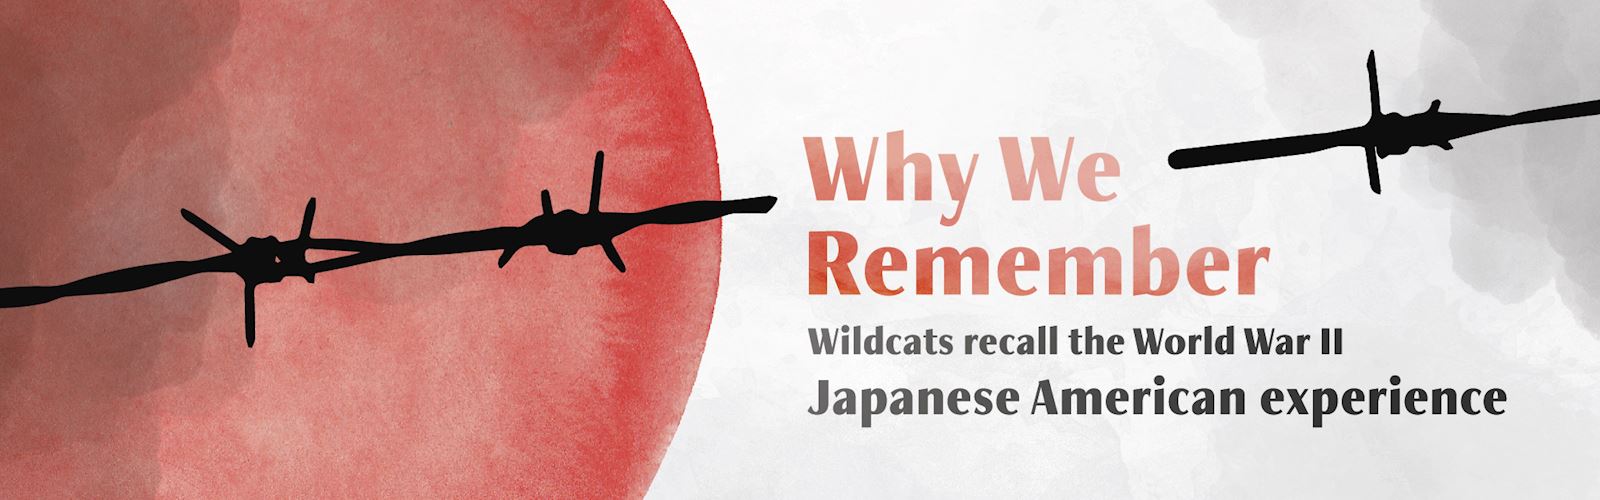 Japanese Americans recall the WWII experience